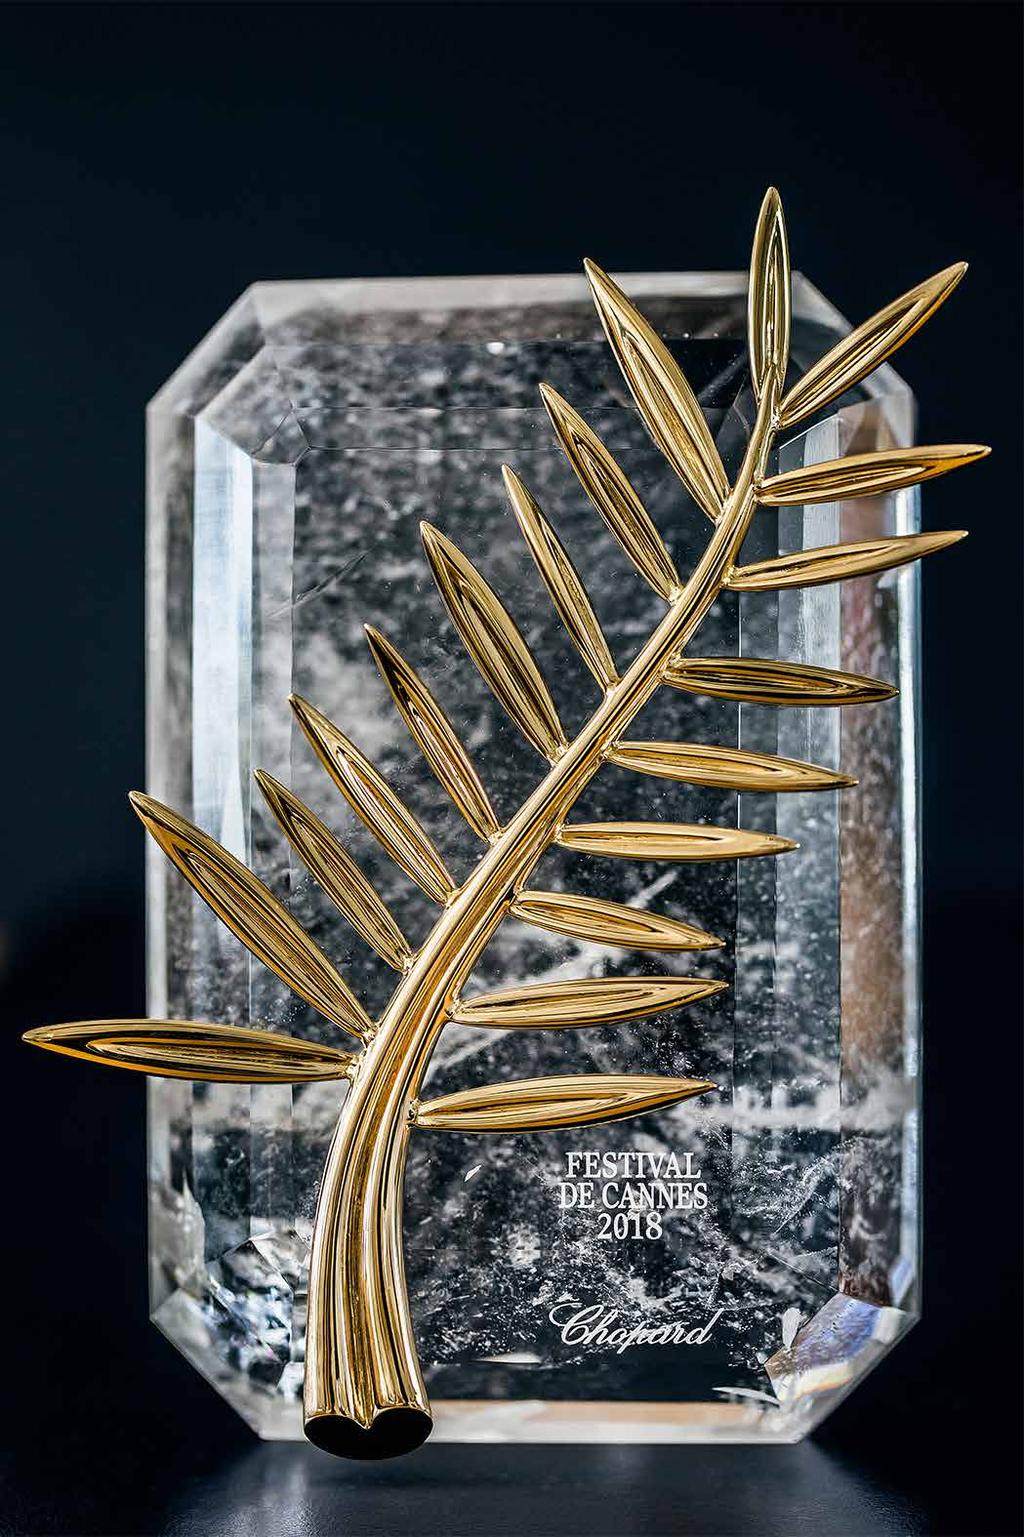 Palme d Or trophy for the 7st Cannes Film Festival, and made each year with Fairminedcertified ethical gold by Chopard in its Haute Joaillerie ateliers. www.chopard.